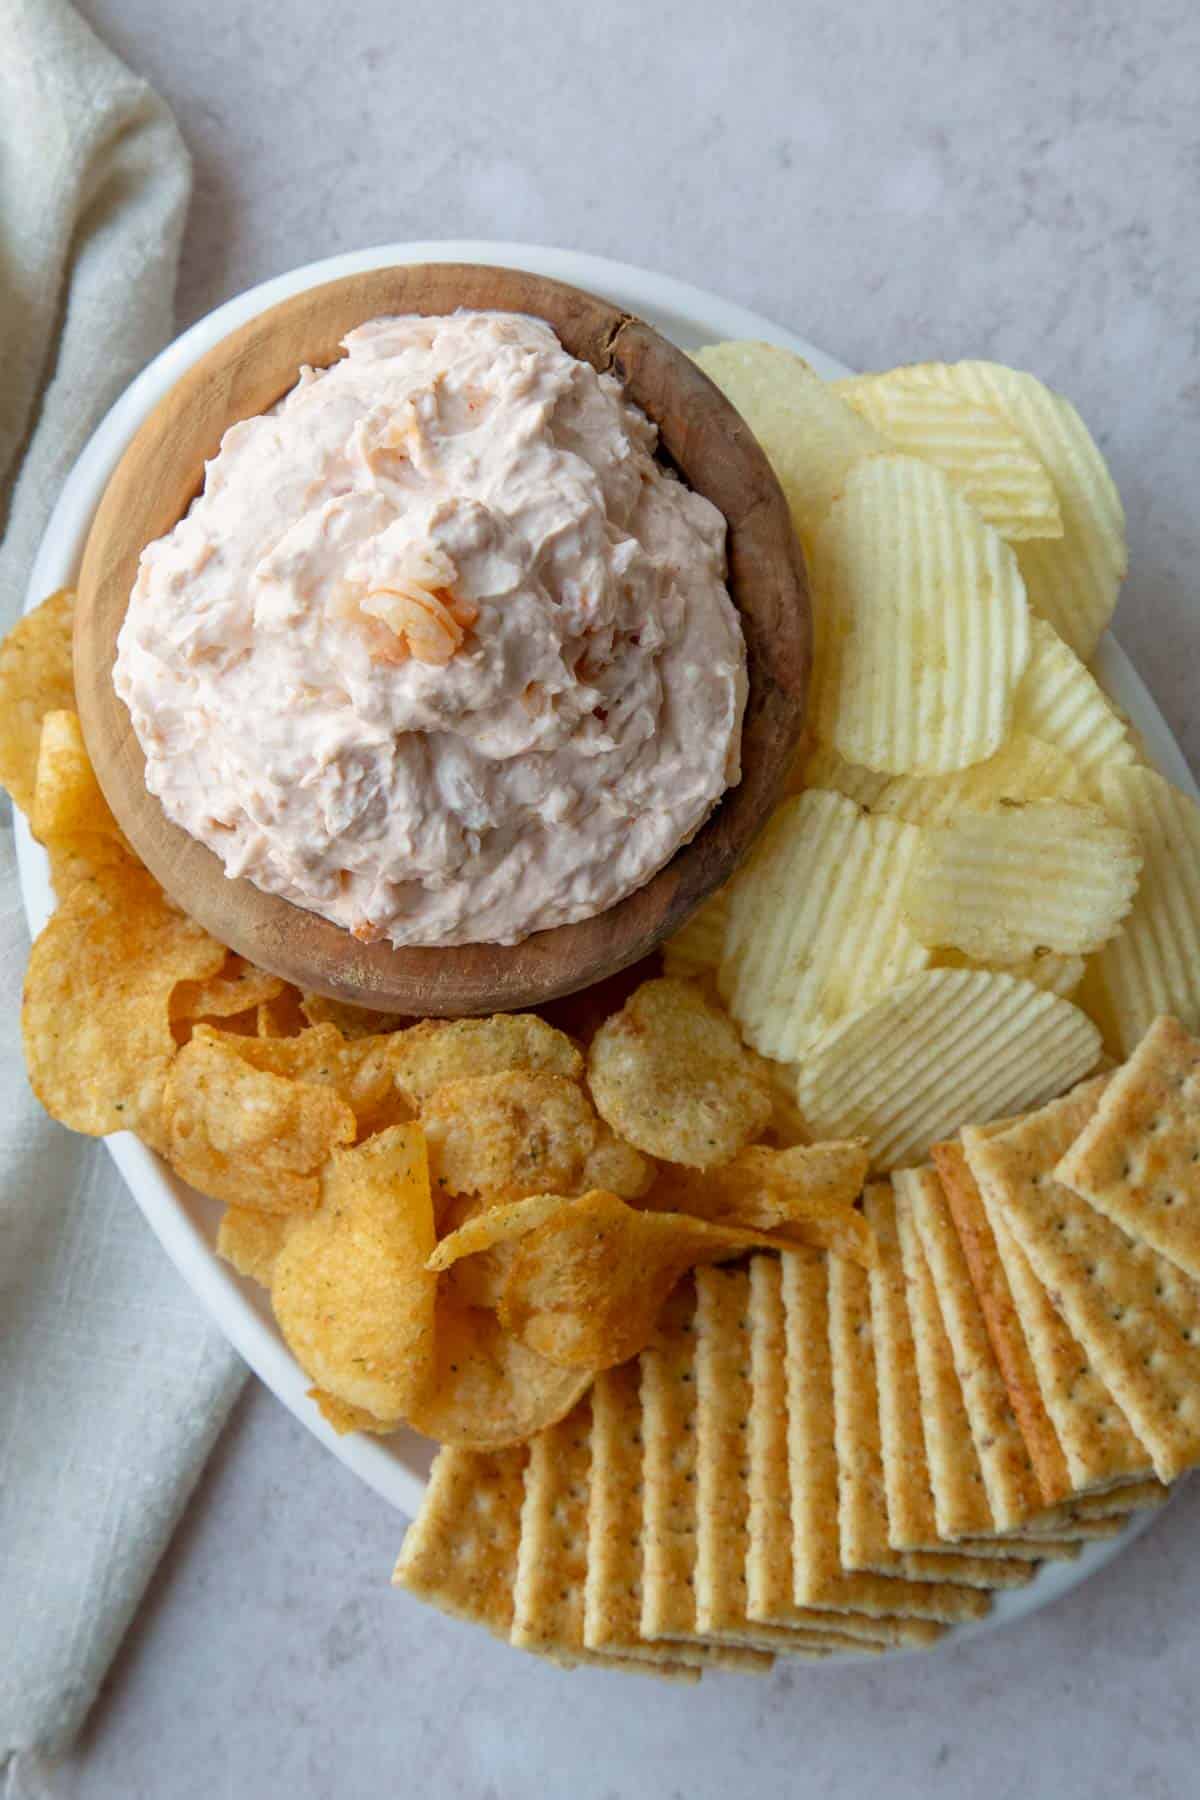 shrimp dip in a wooden bowl surrounded by chips and crackers.